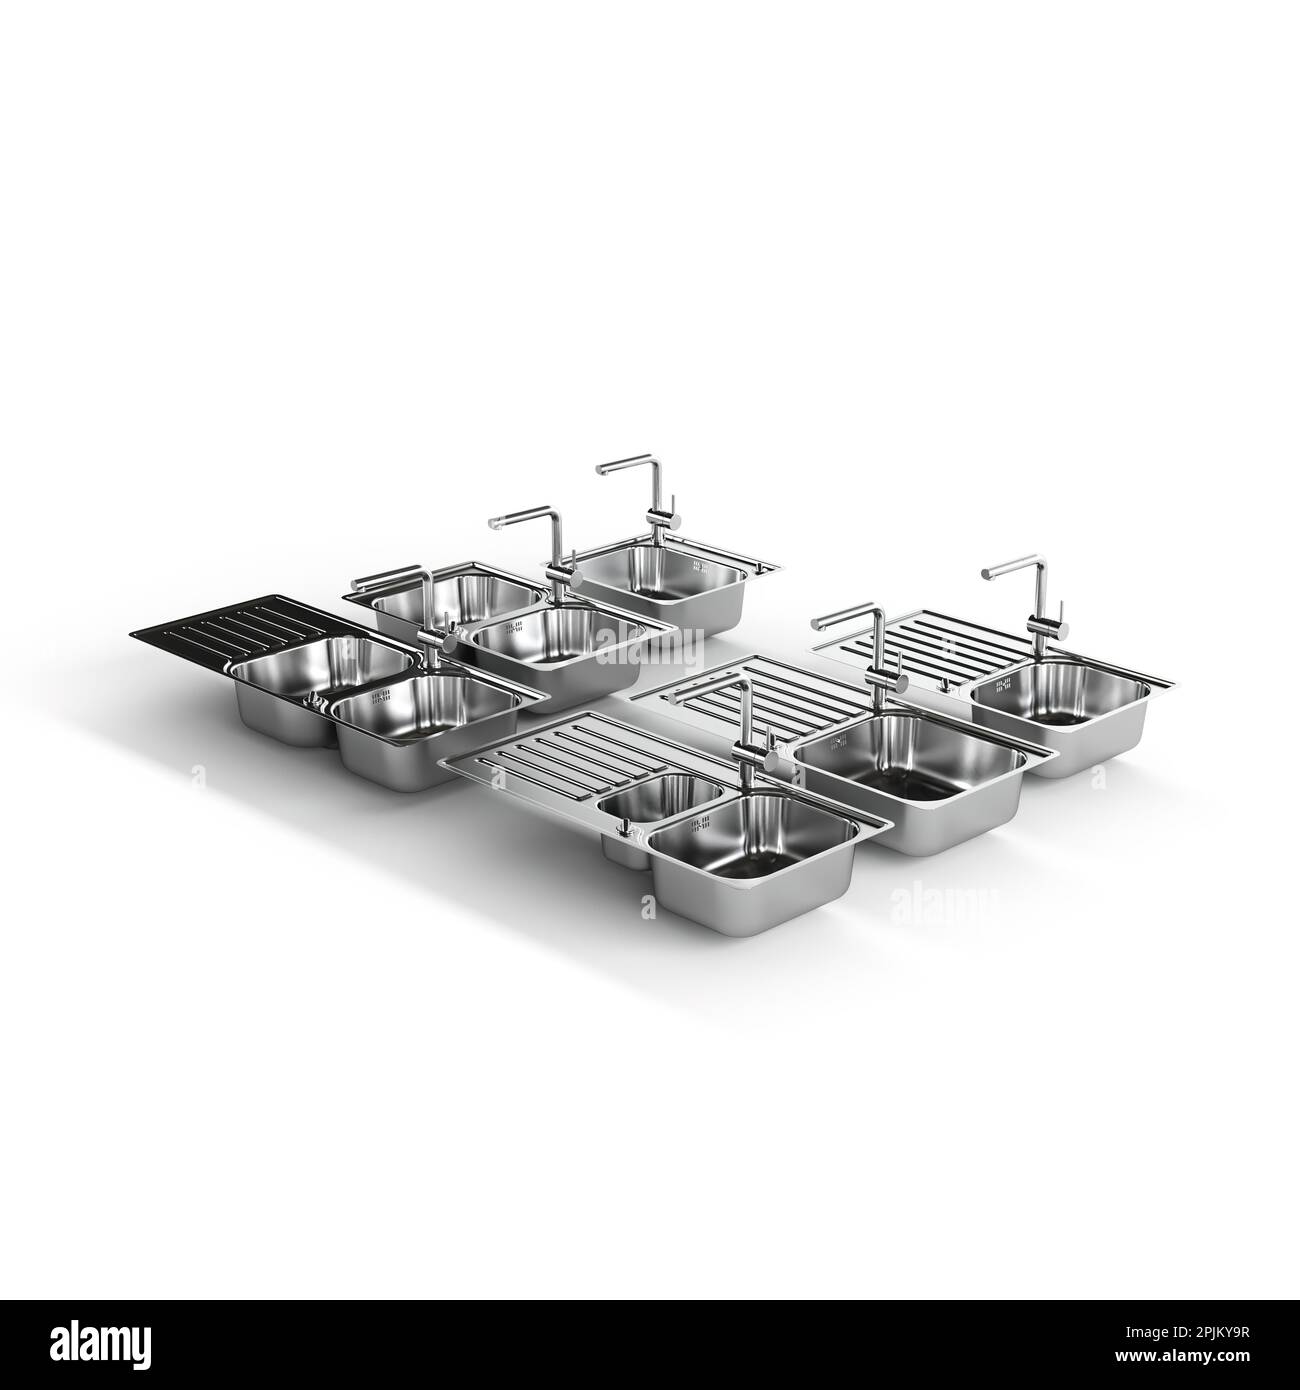 https://c8.alamy.com/comp/2PJKY9R/a-3d-rendering-of-a-stainless-steel-kitchen-sinks-with-modern-faucets-arranged-on-a-white-surface-2PJKY9R.jpg